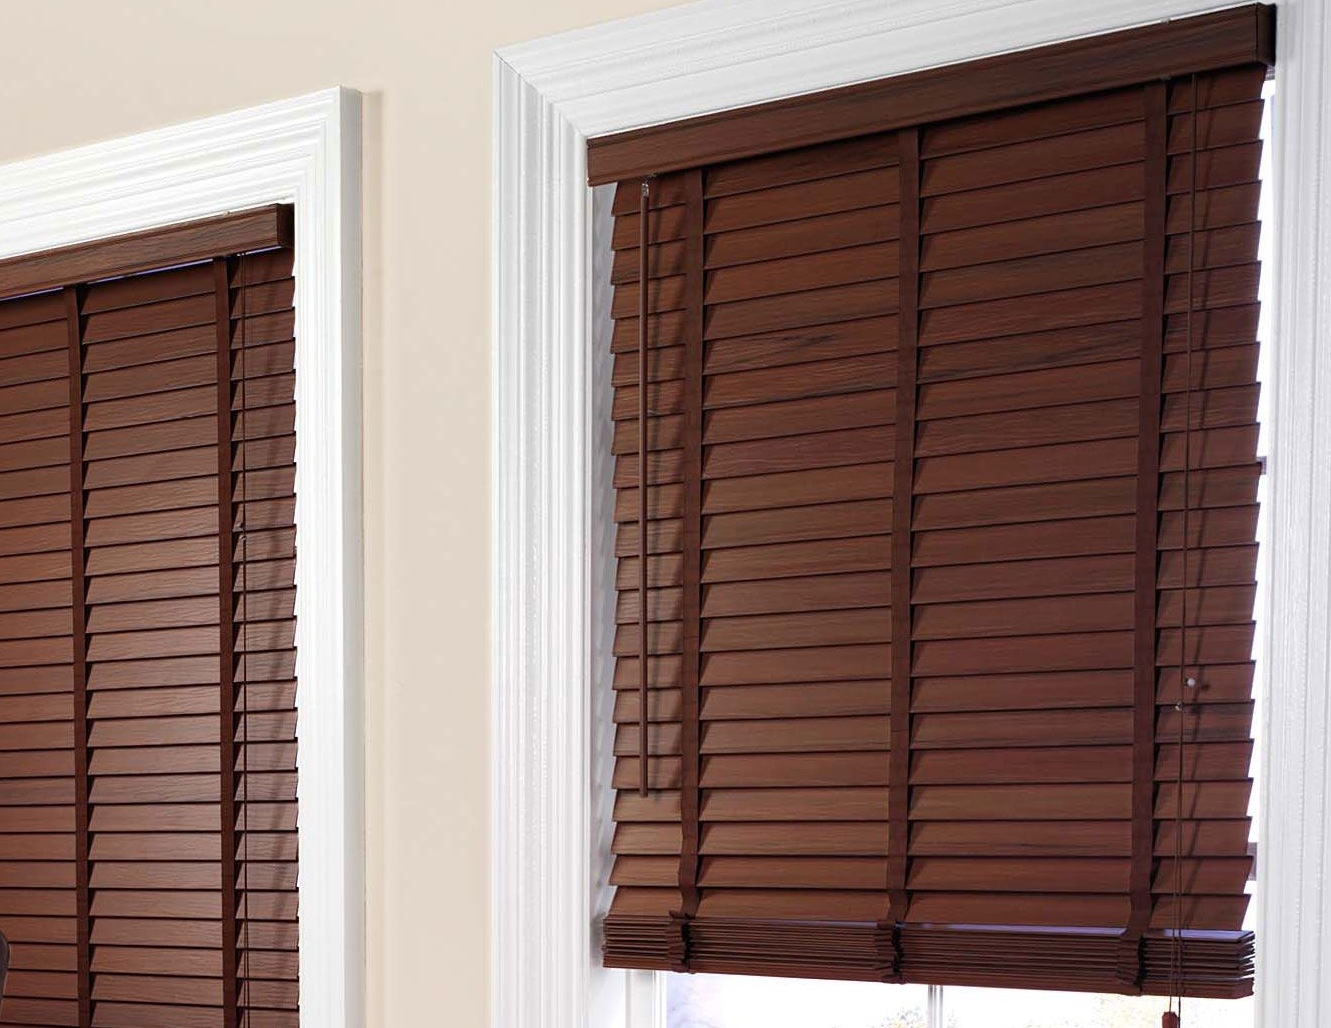 Lister Cartwright FAUX WOODGRAIN STYLE VENETIAN BLINDS TRIMMABLE EASY FIT BLIND HOME OFFICE S 90X160CM